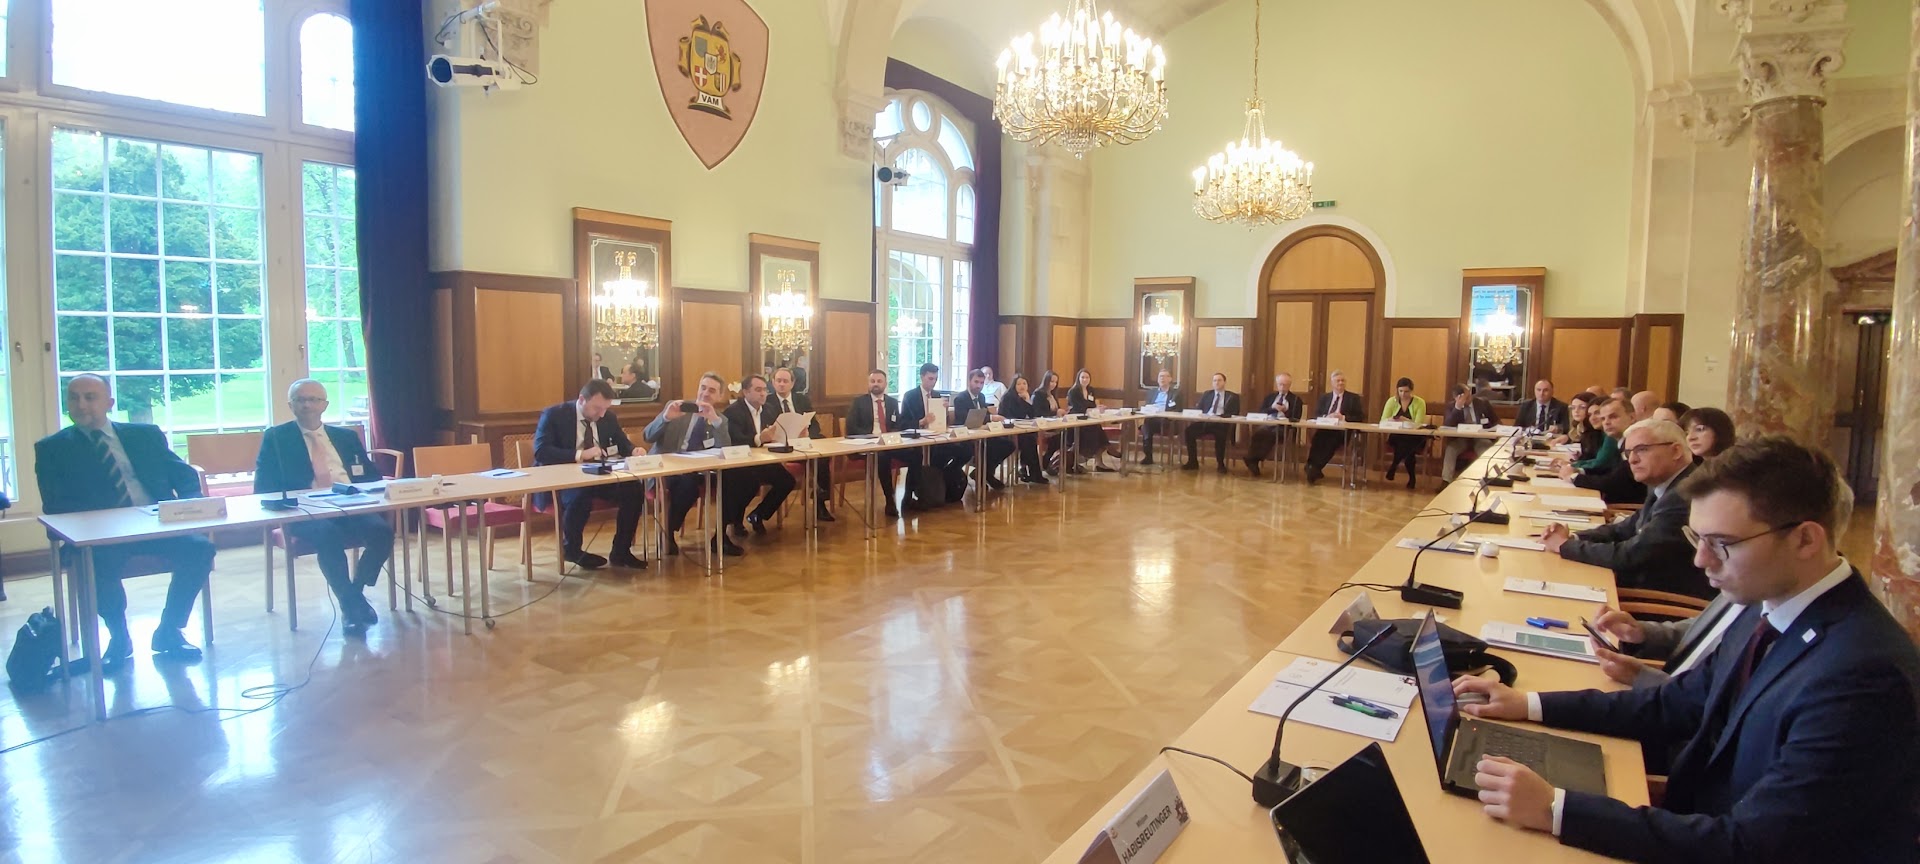 Meeting of the PfP Consortium’s Regional Stability in South East Europe Study Group